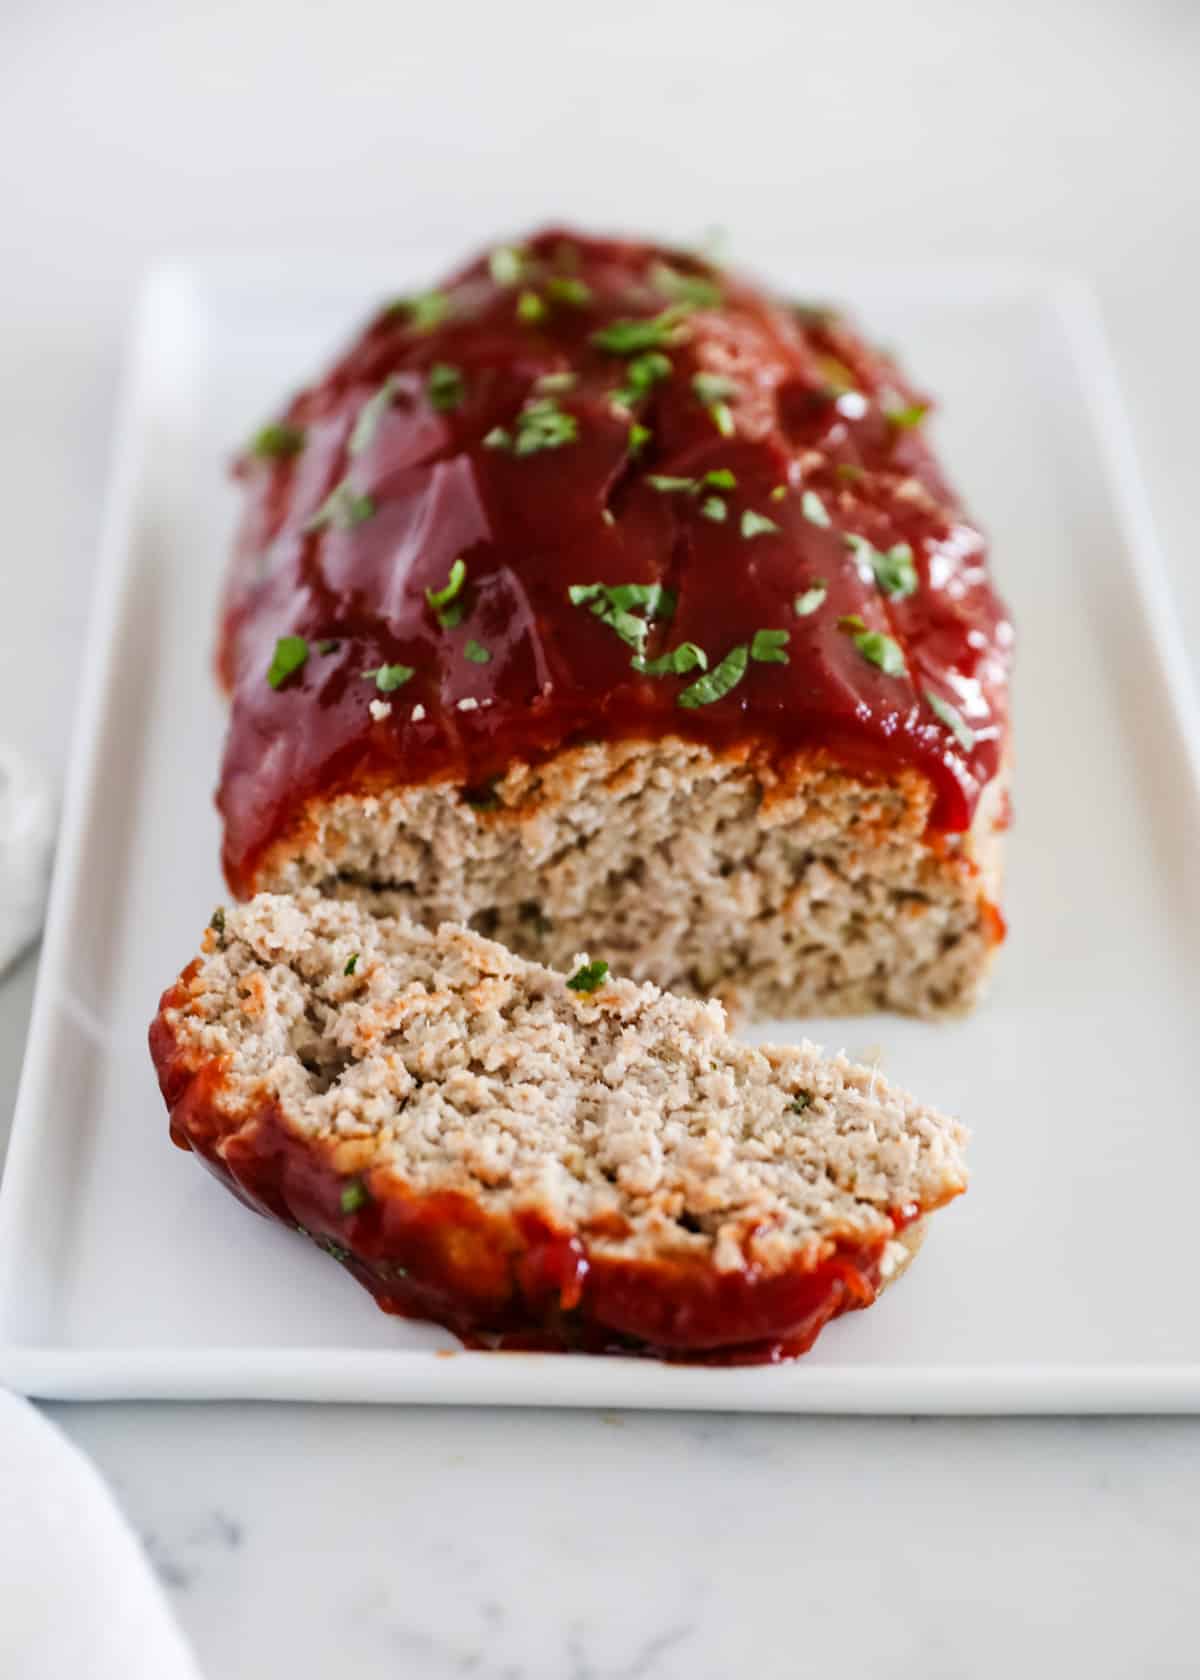 Why Turkey Meatloaf is a Healthy and Delicious Option